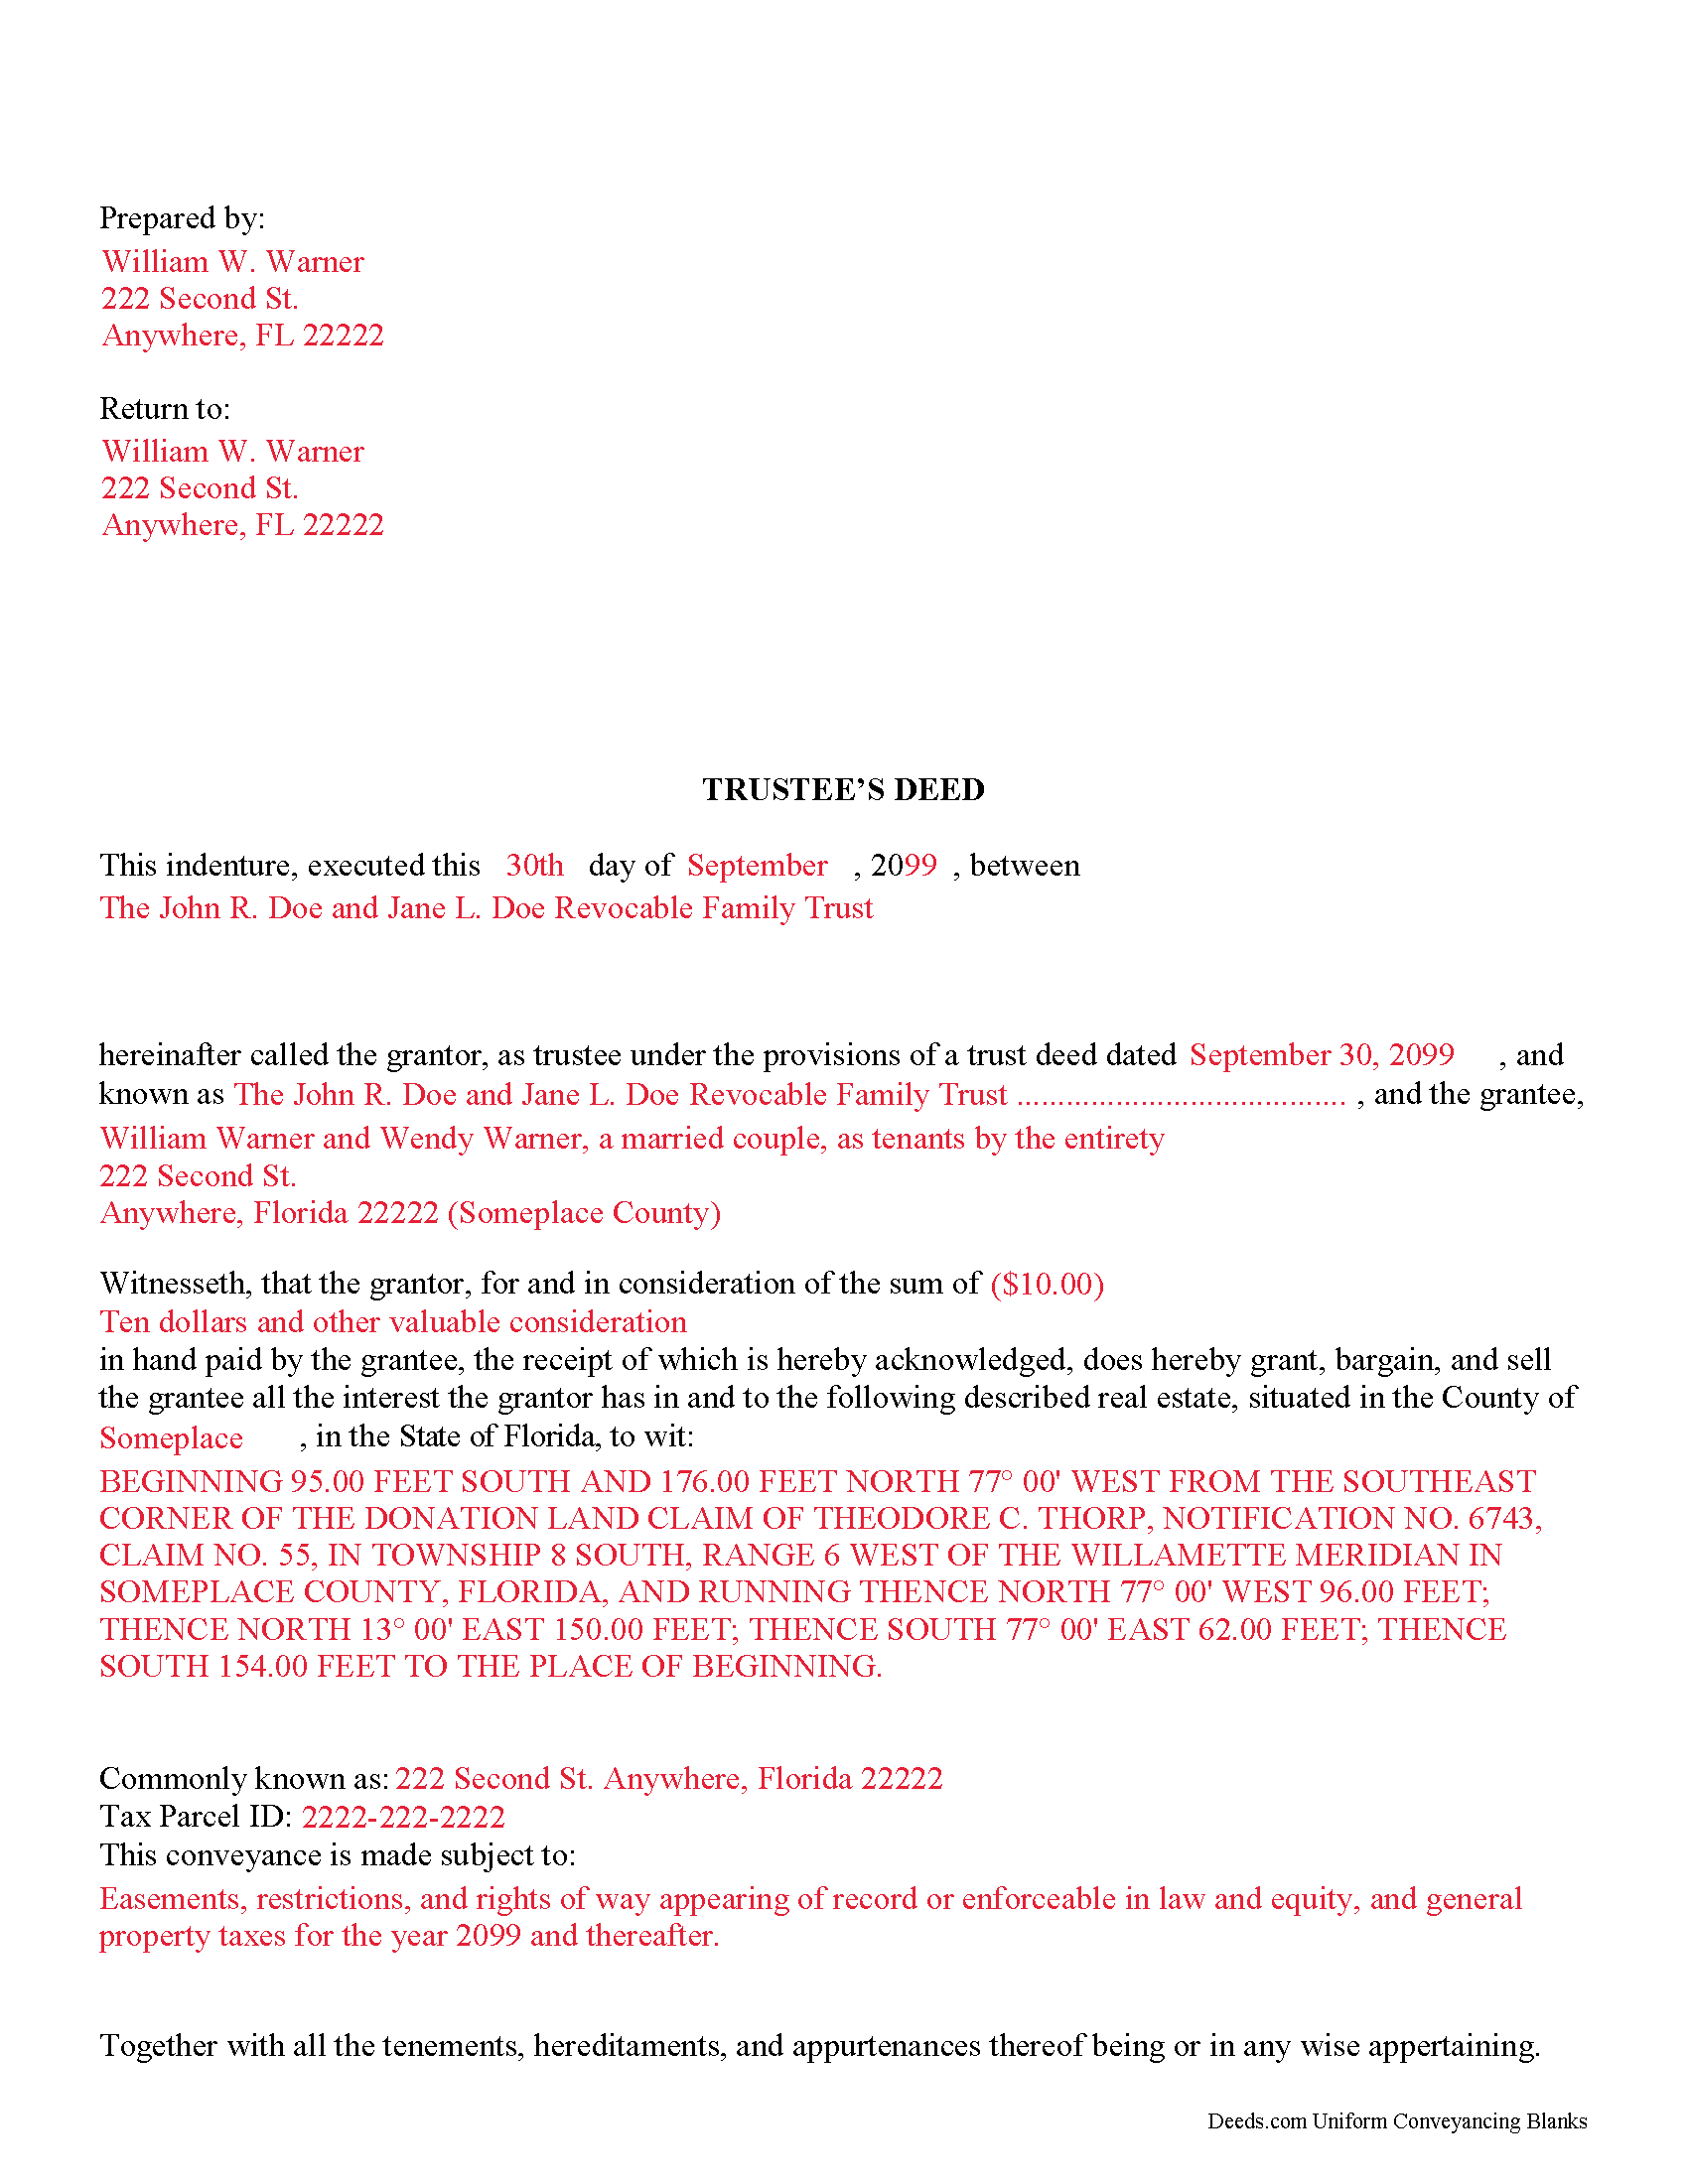 Completed Example of the Trustees Deed Document